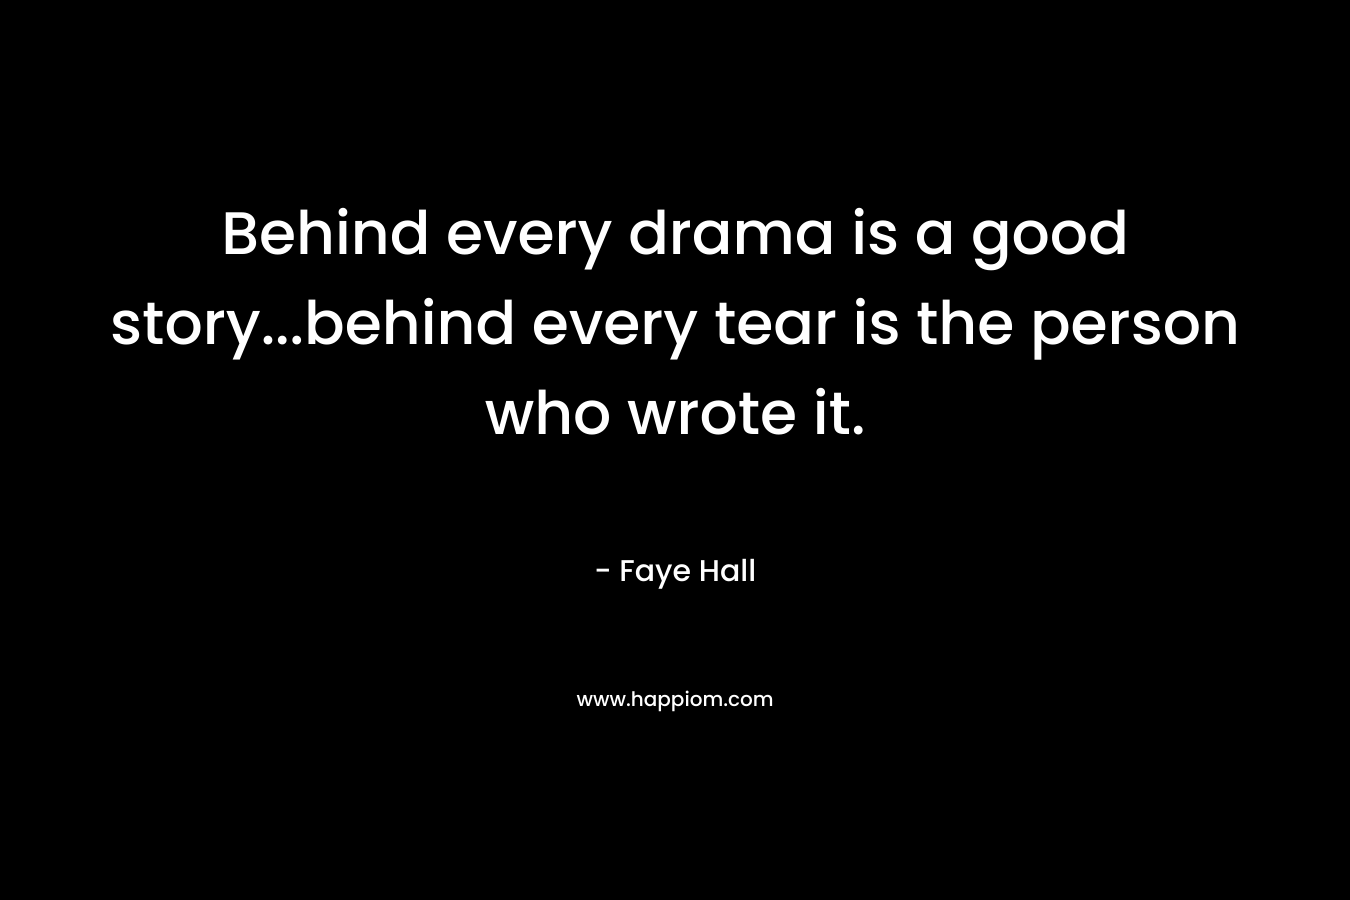 Behind every drama is a good story...behind every tear is the person who wrote it.